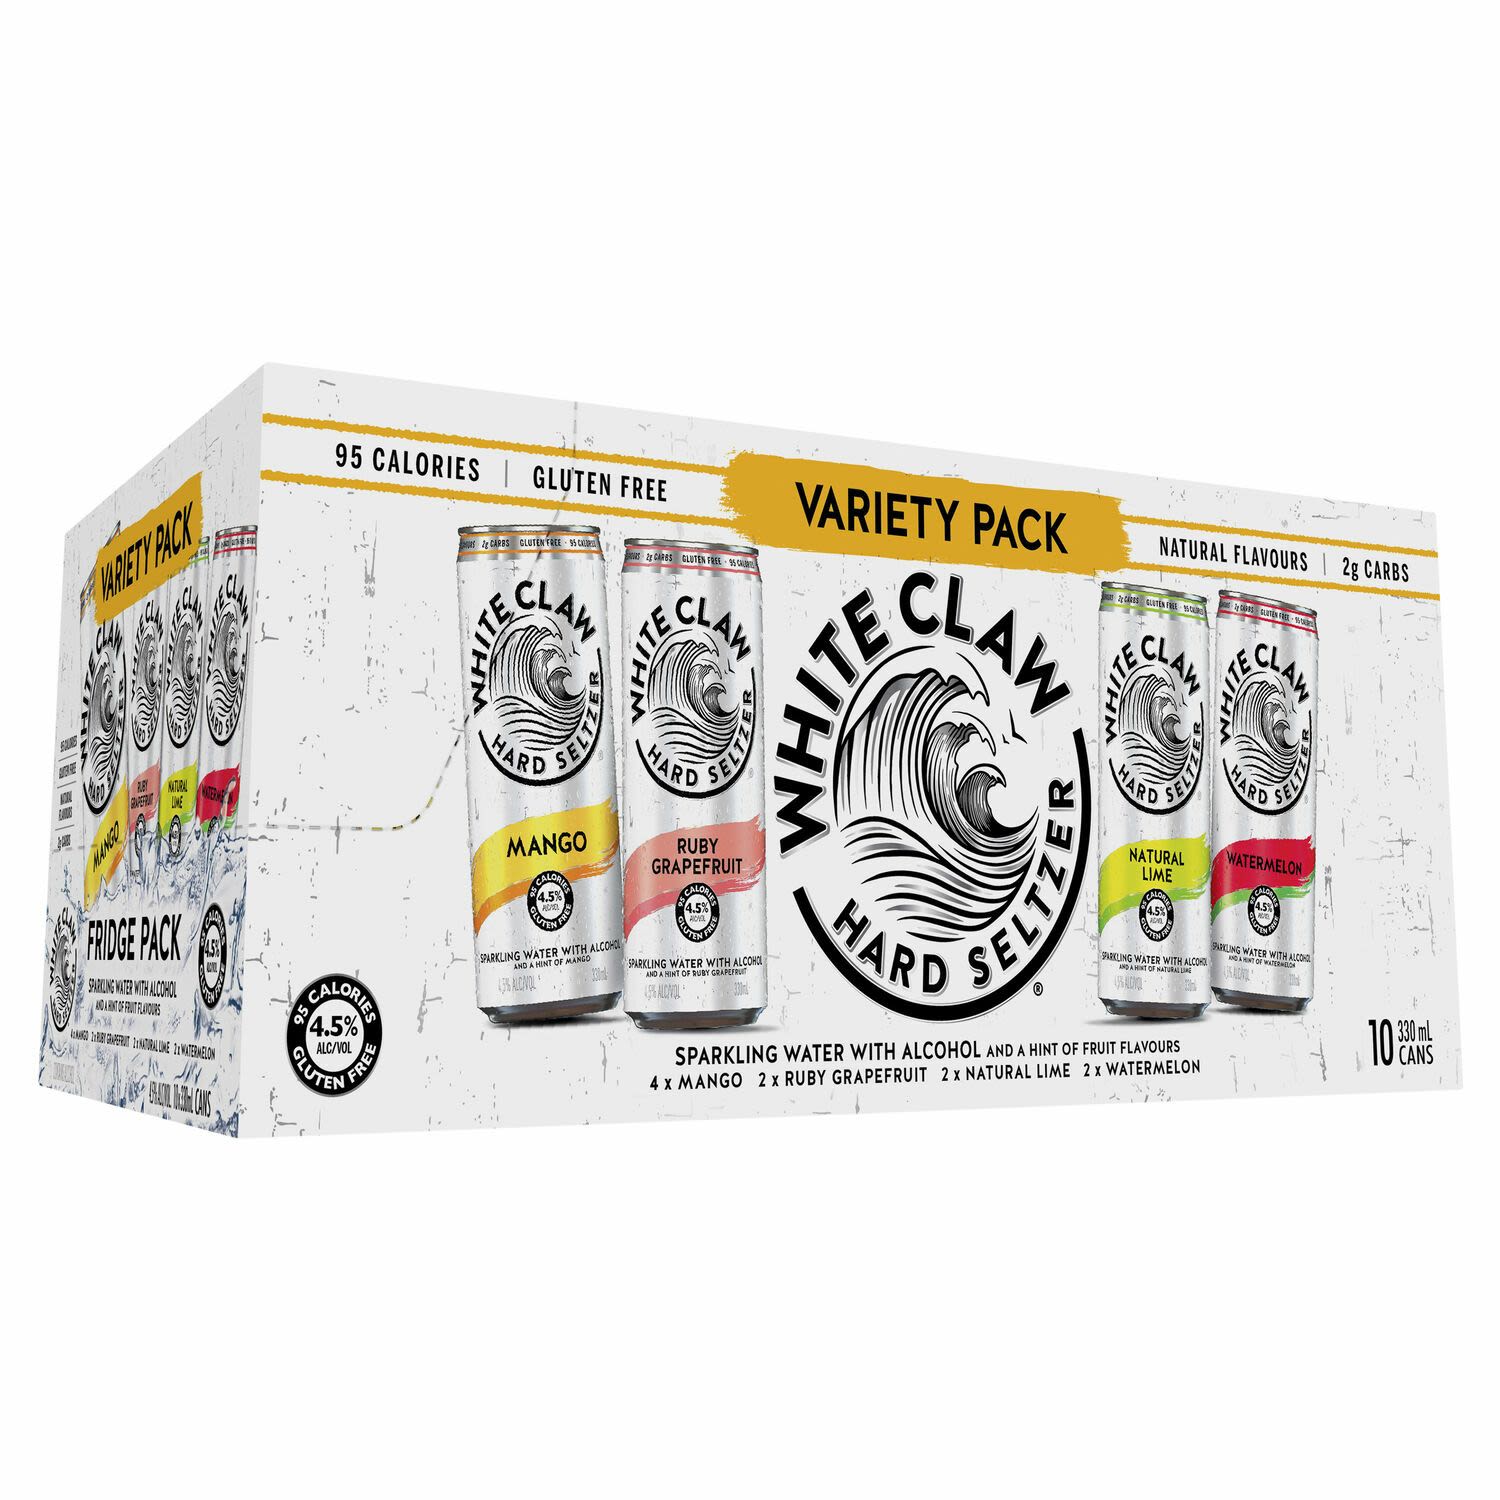 White Claw Seltzer Can Variety Pack #1 330mL 10 Pack